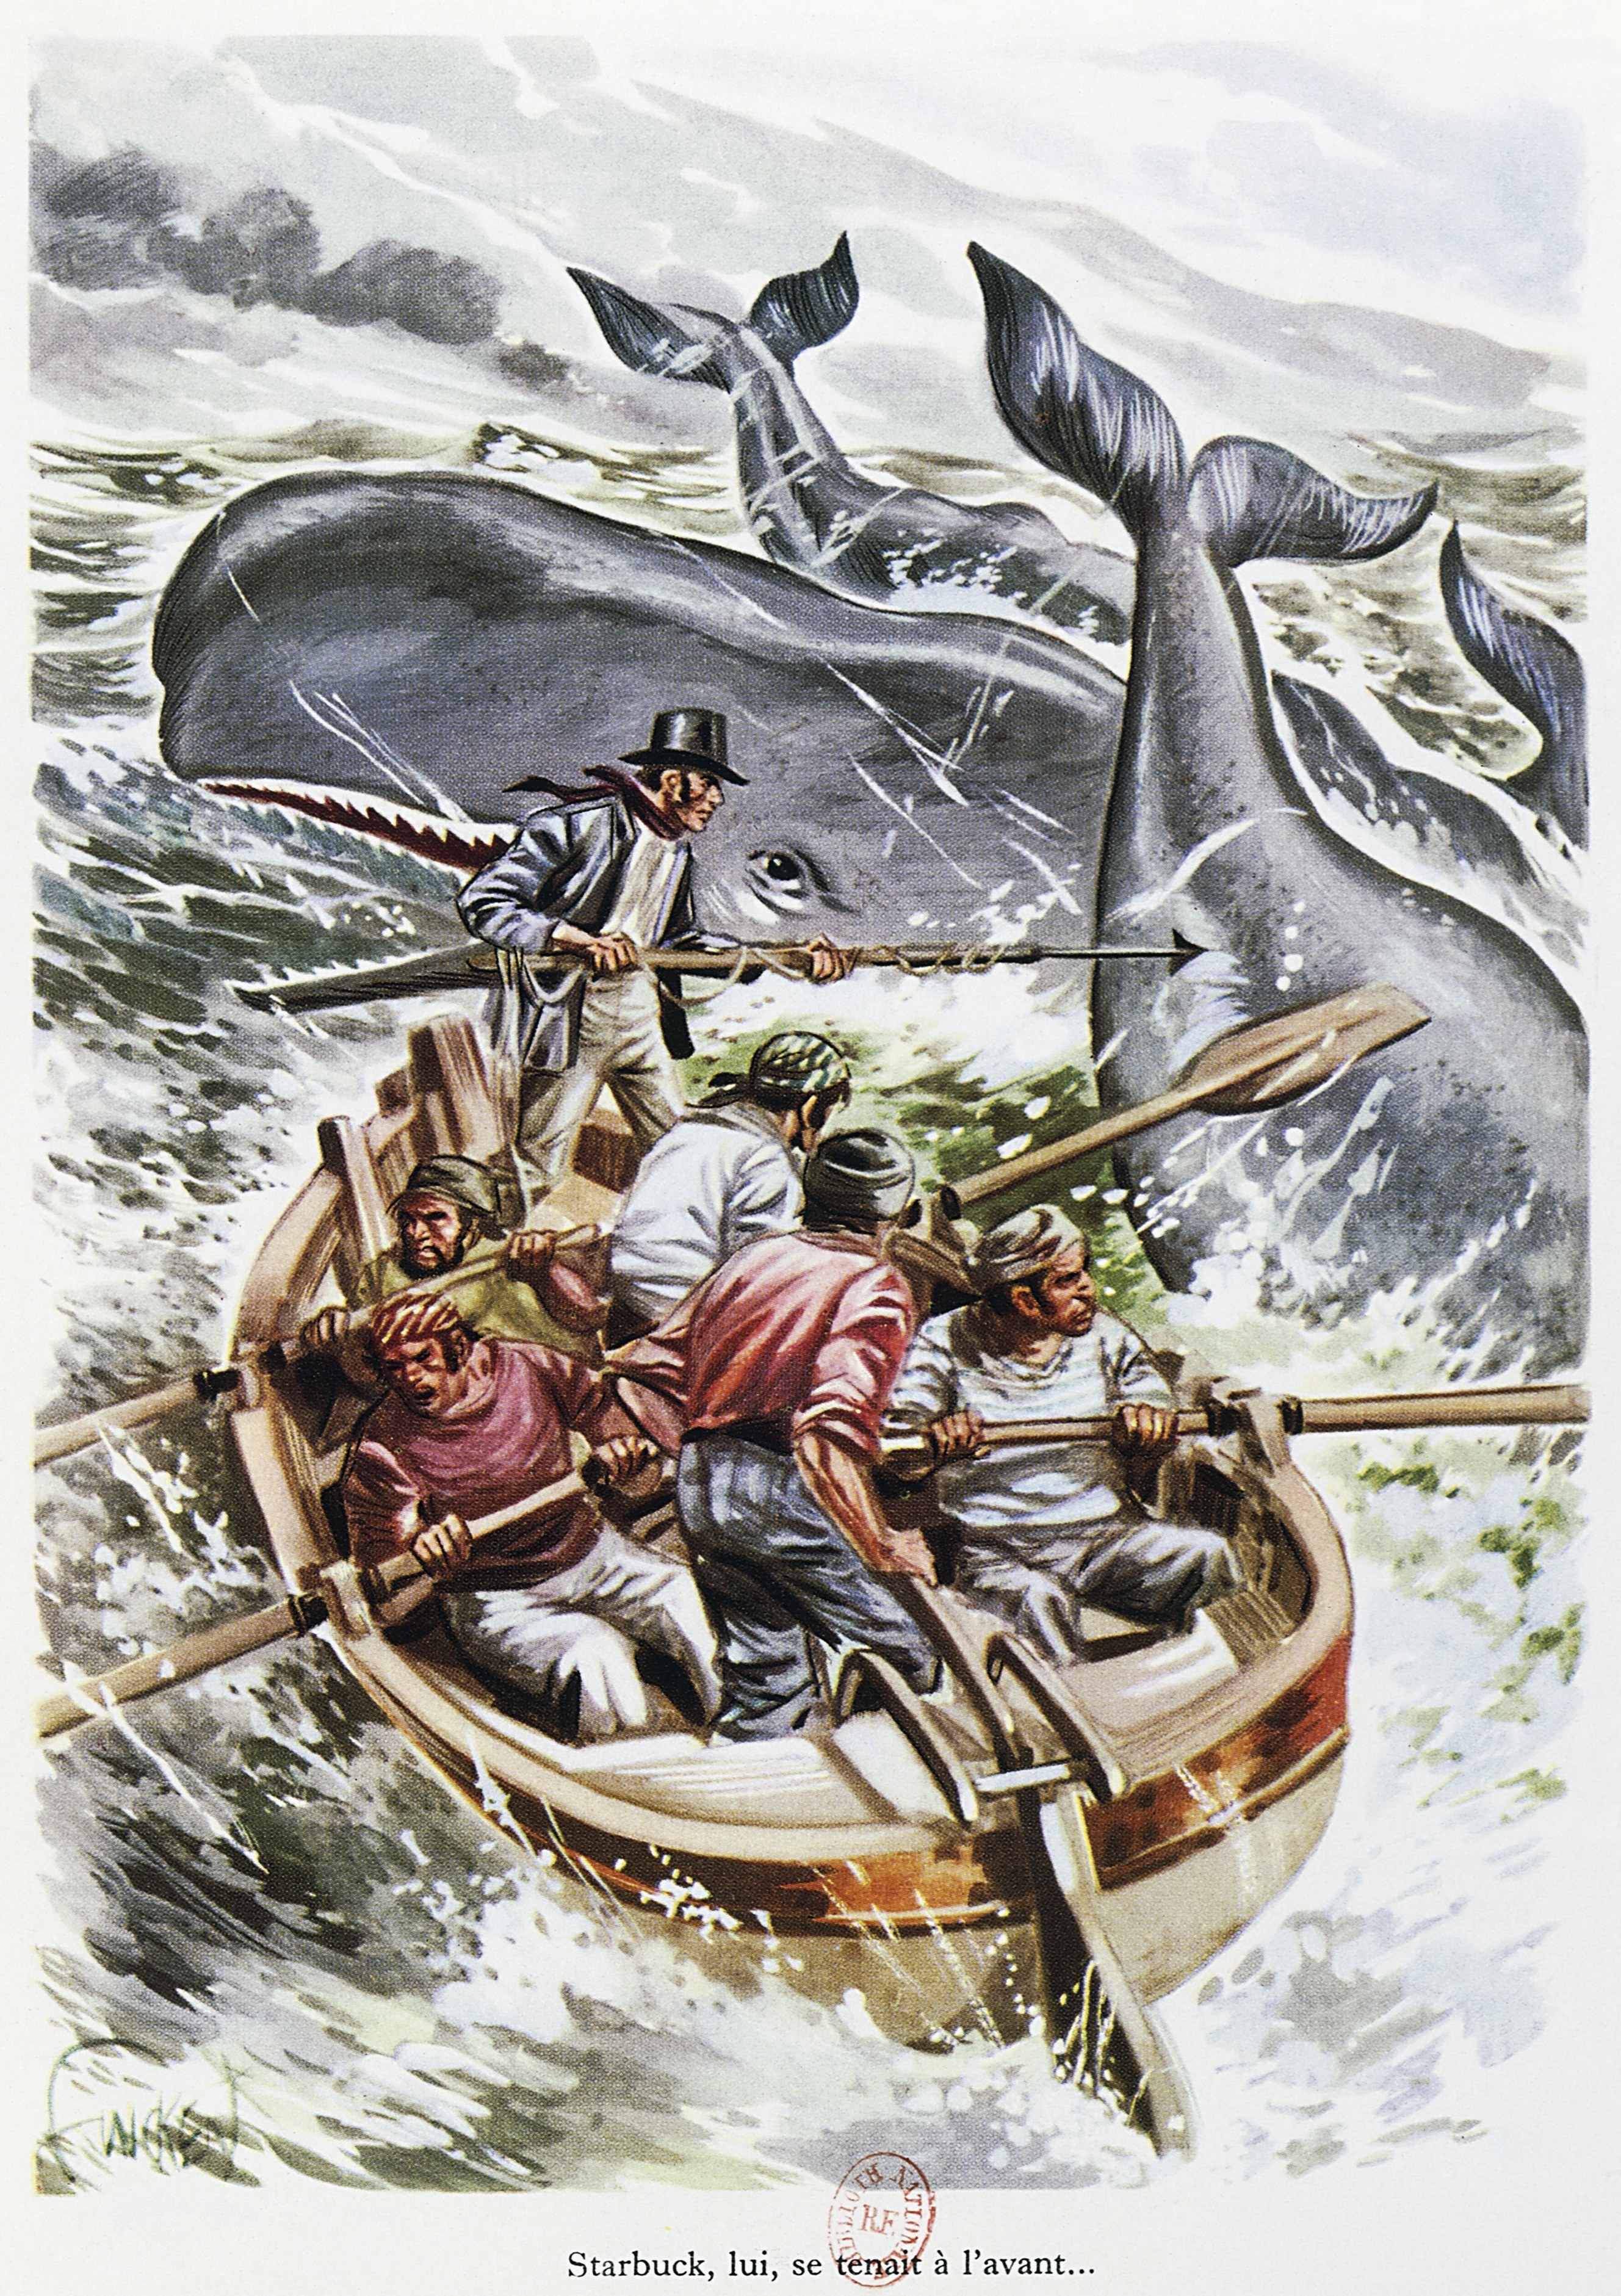 A painting of Starbuck and a crew hunting whales on a boat